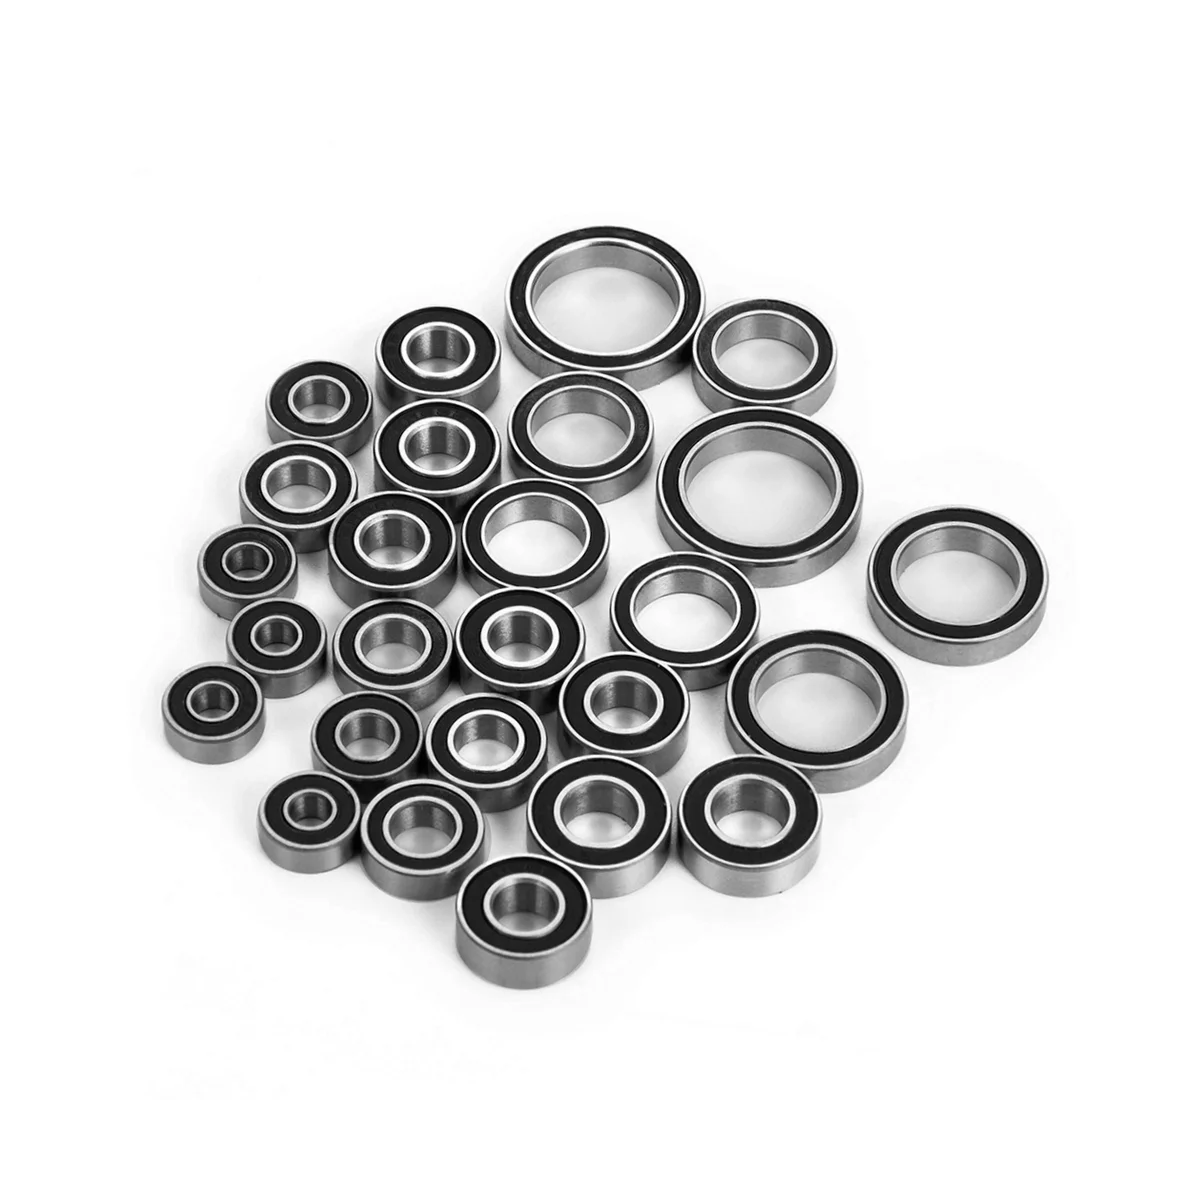 

26Pcs Sealed Bearing Kit for Traxxas TRX-4 TRX4 1/10 RC Crawler Car Upgrade Parts Accessories